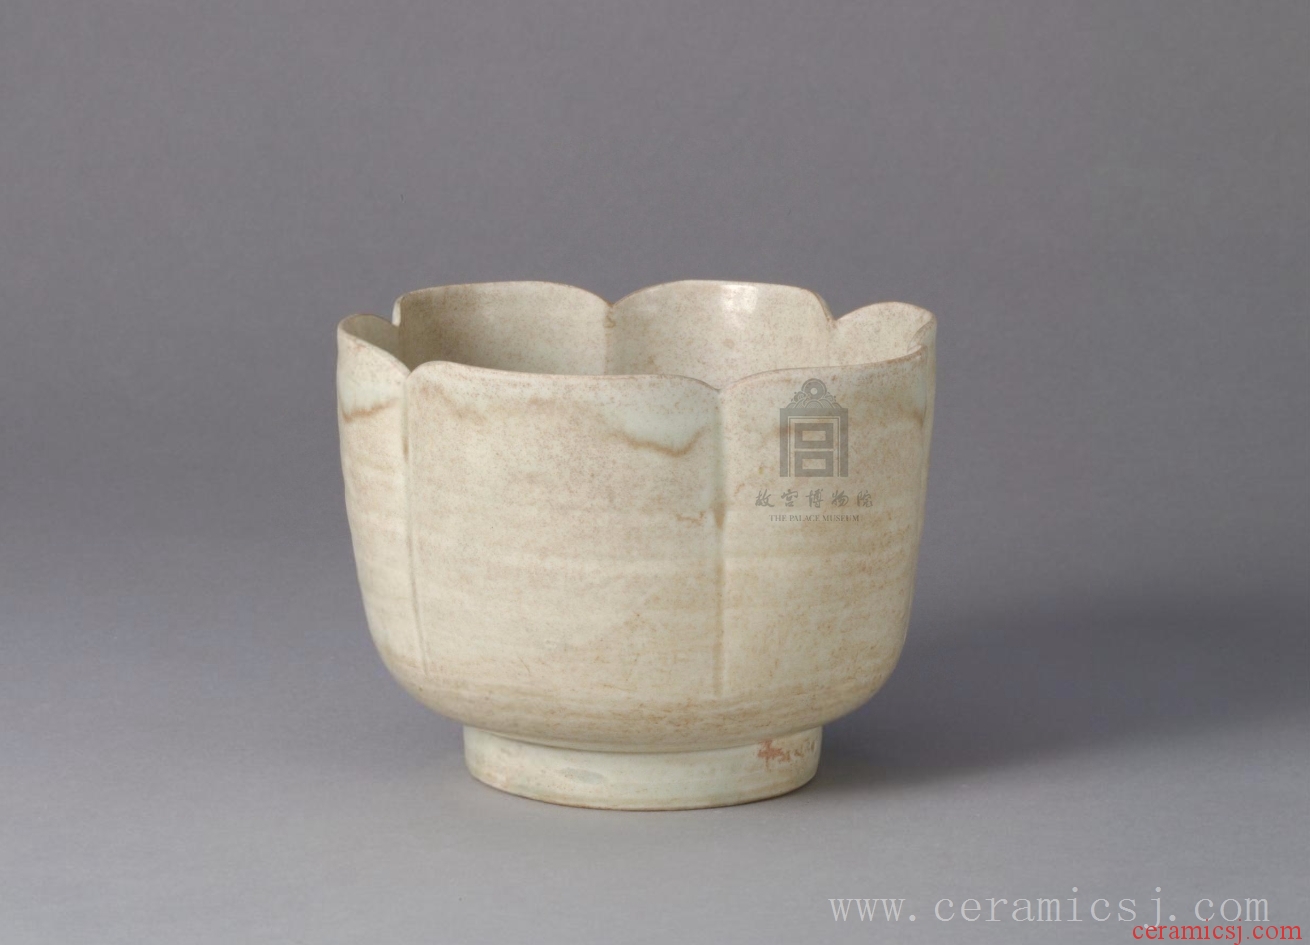 Period: Song dynasty (960-1279) 